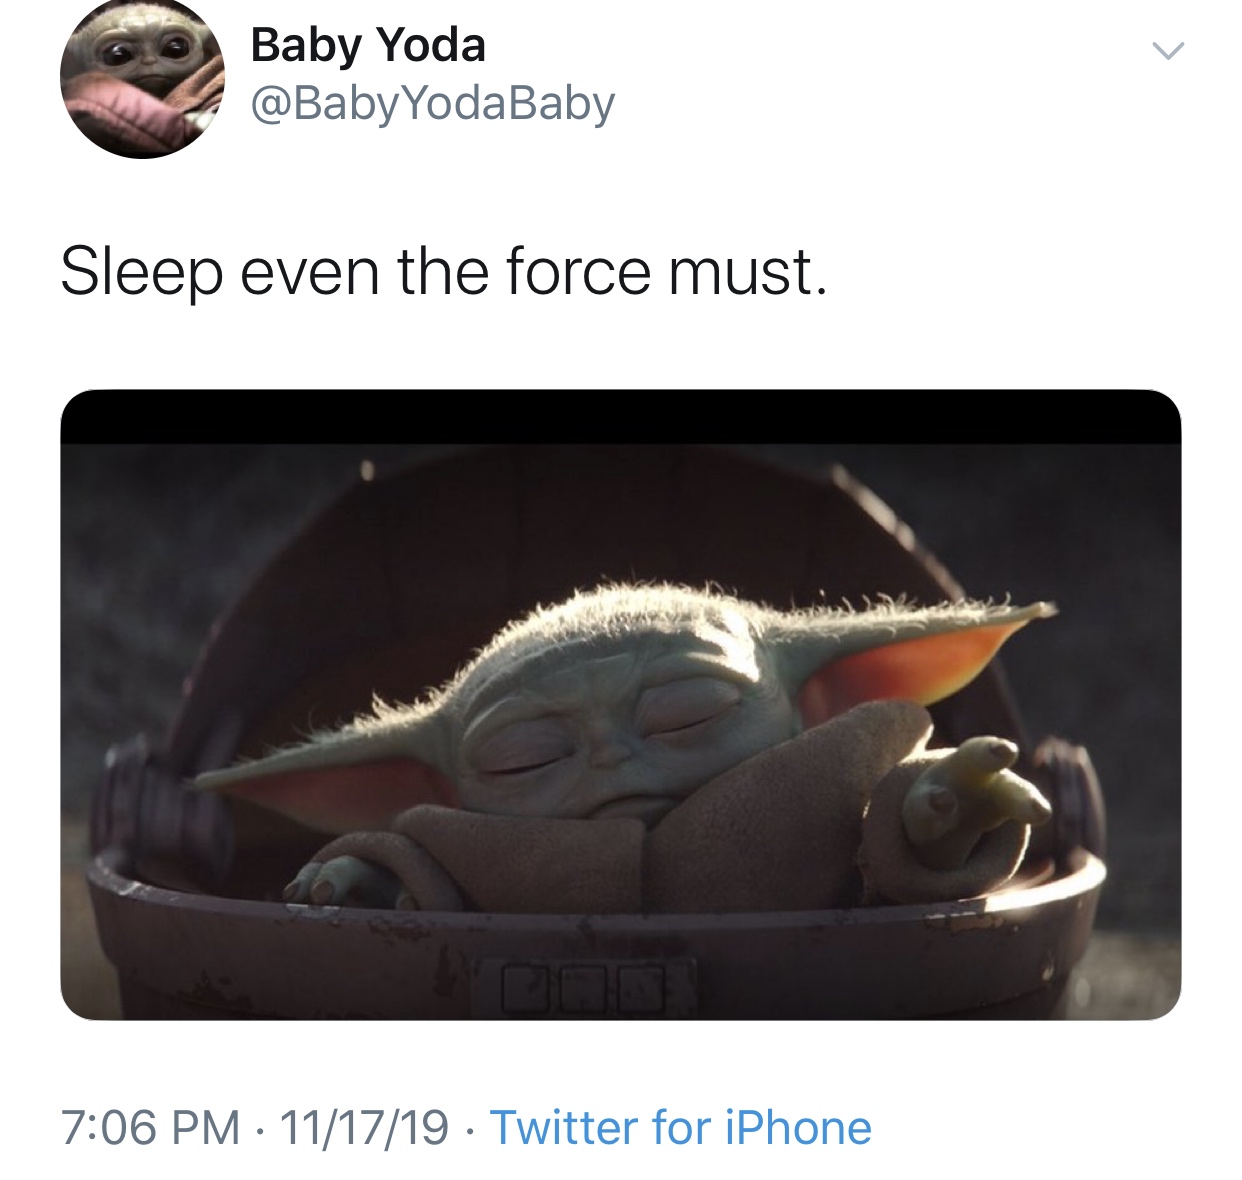 baby yoda meme - Baby Yoda Sleep even the force must. 111719 Twitter for iPhone